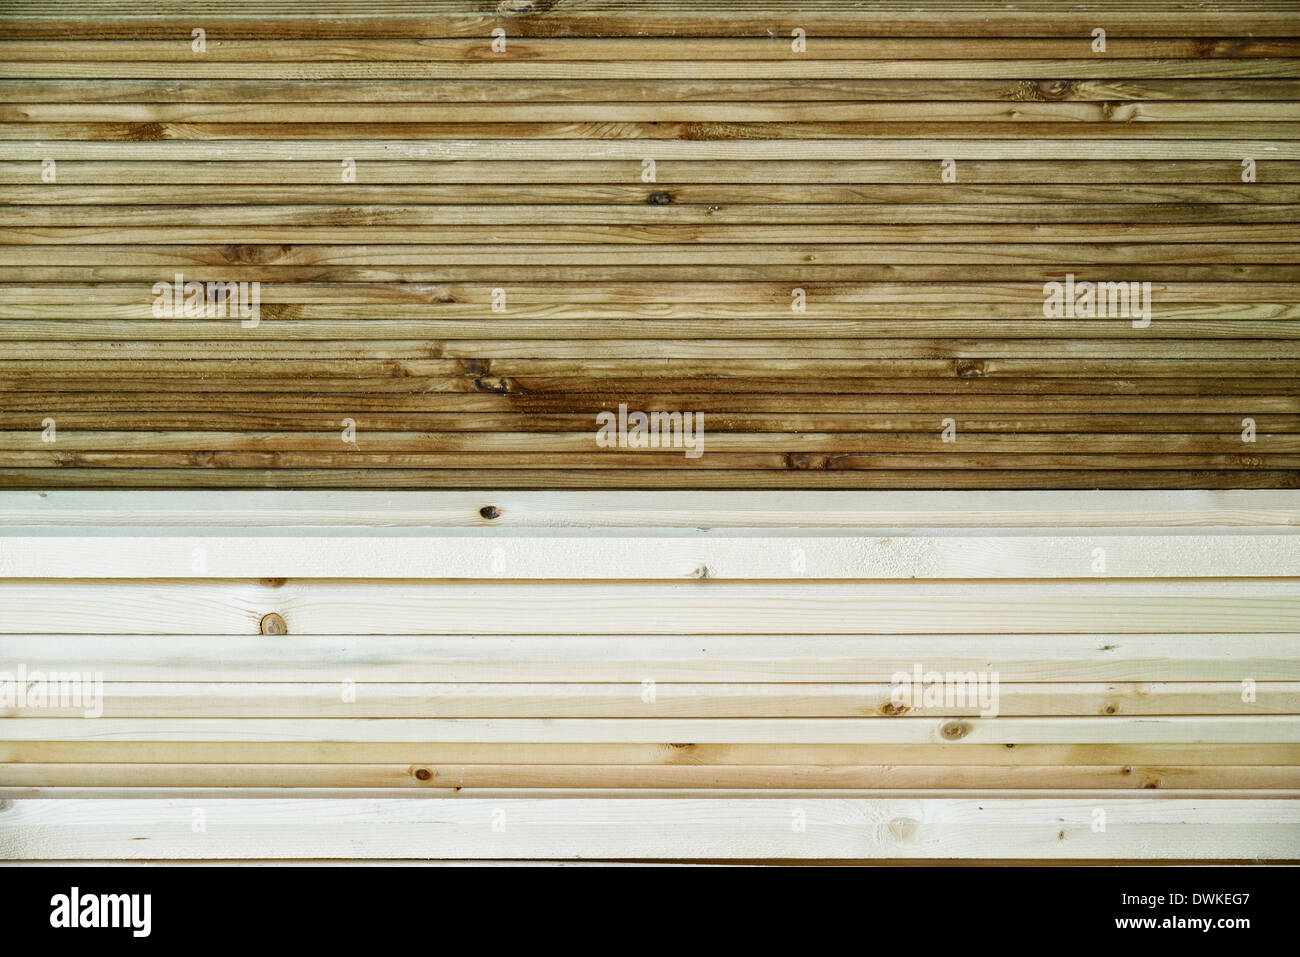 Closeup of Stacked woods, Building materials. Stock Photo